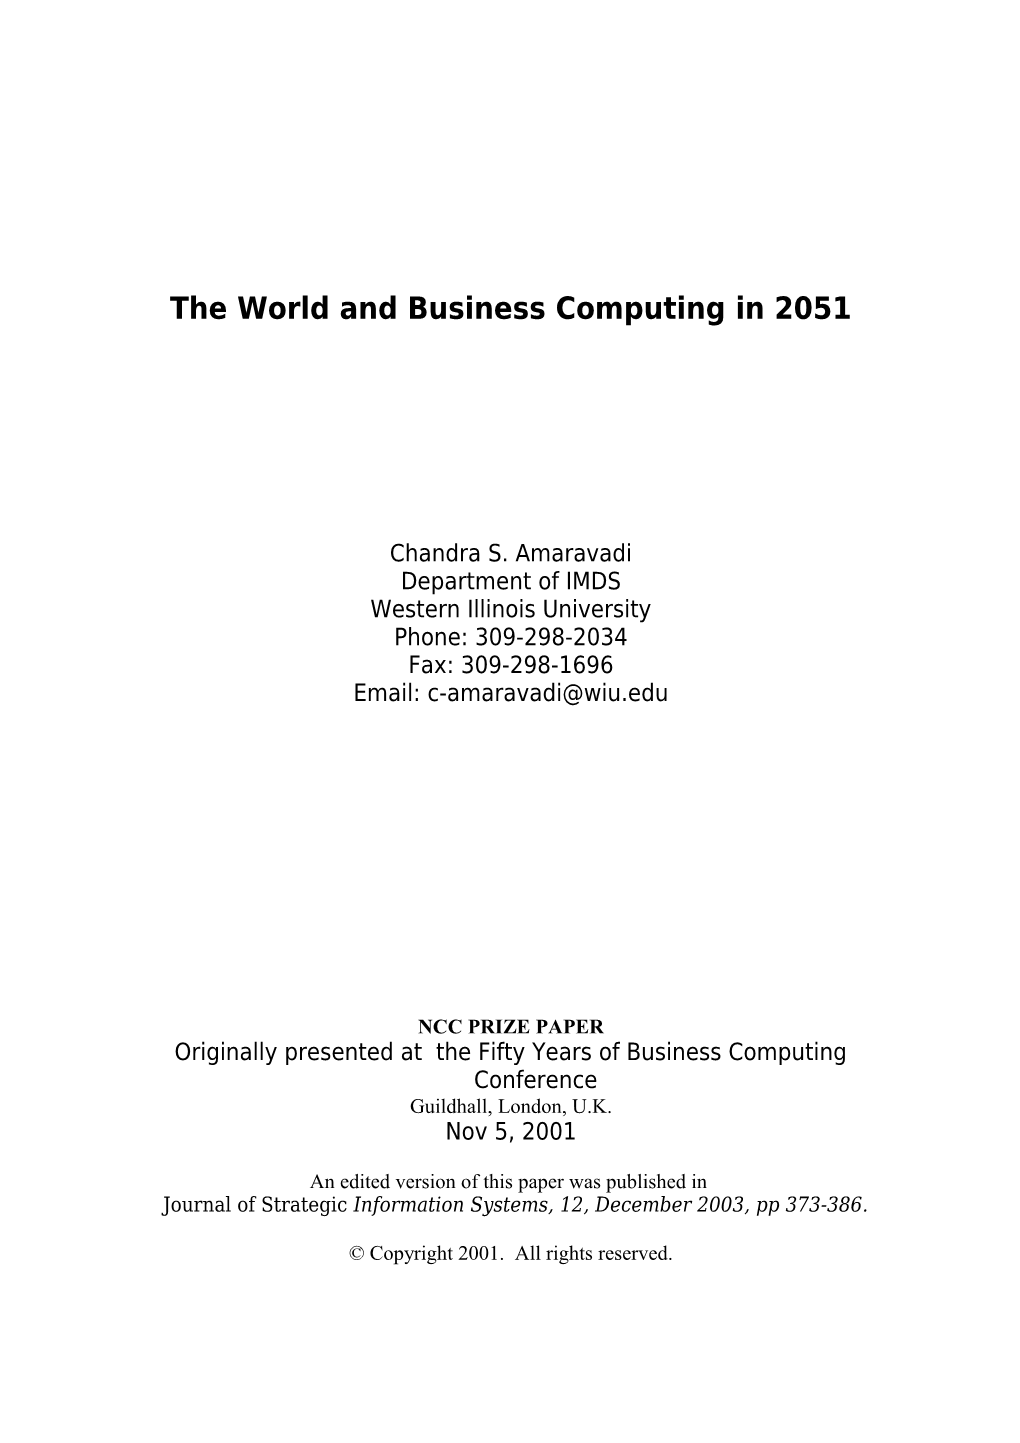 The World and Business Computing in 2051